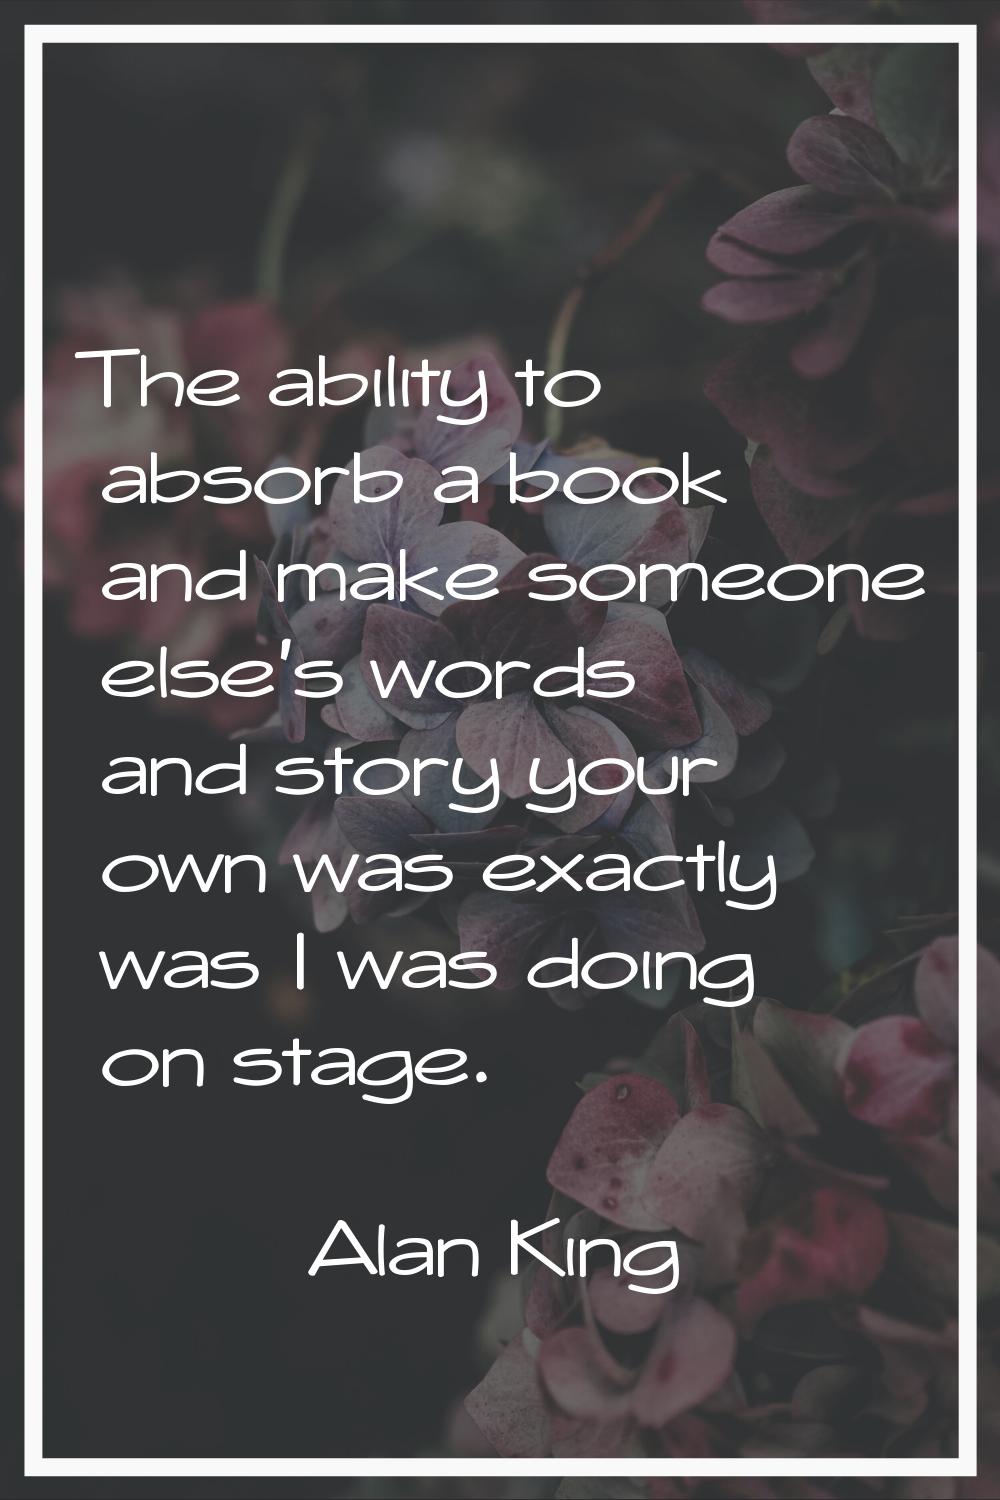 The ability to absorb a book and make someone else's words and story your own was exactly was I was